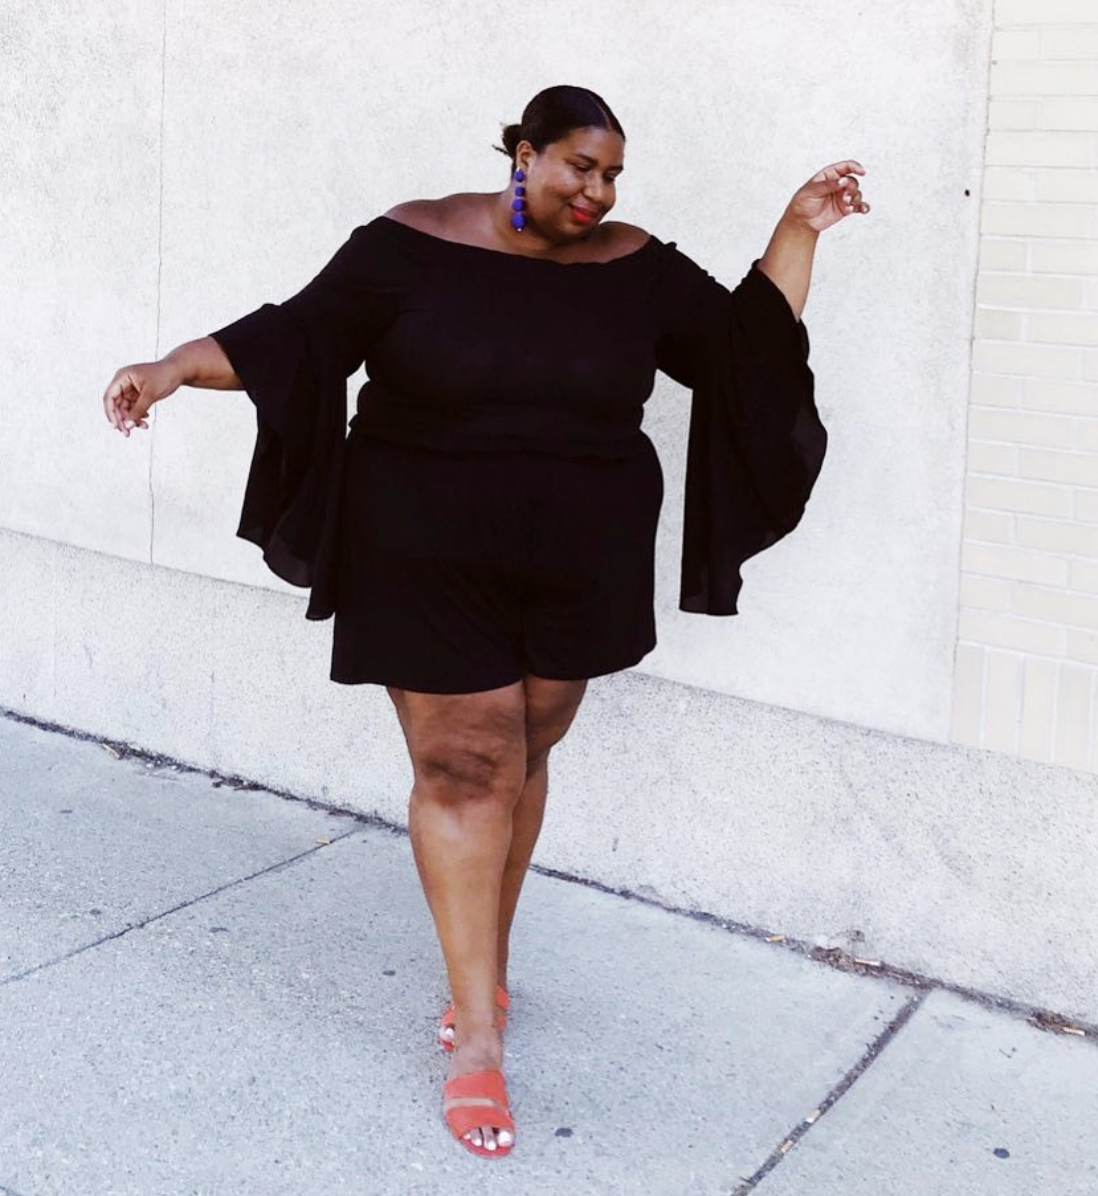 Plus-size New Year's dresses